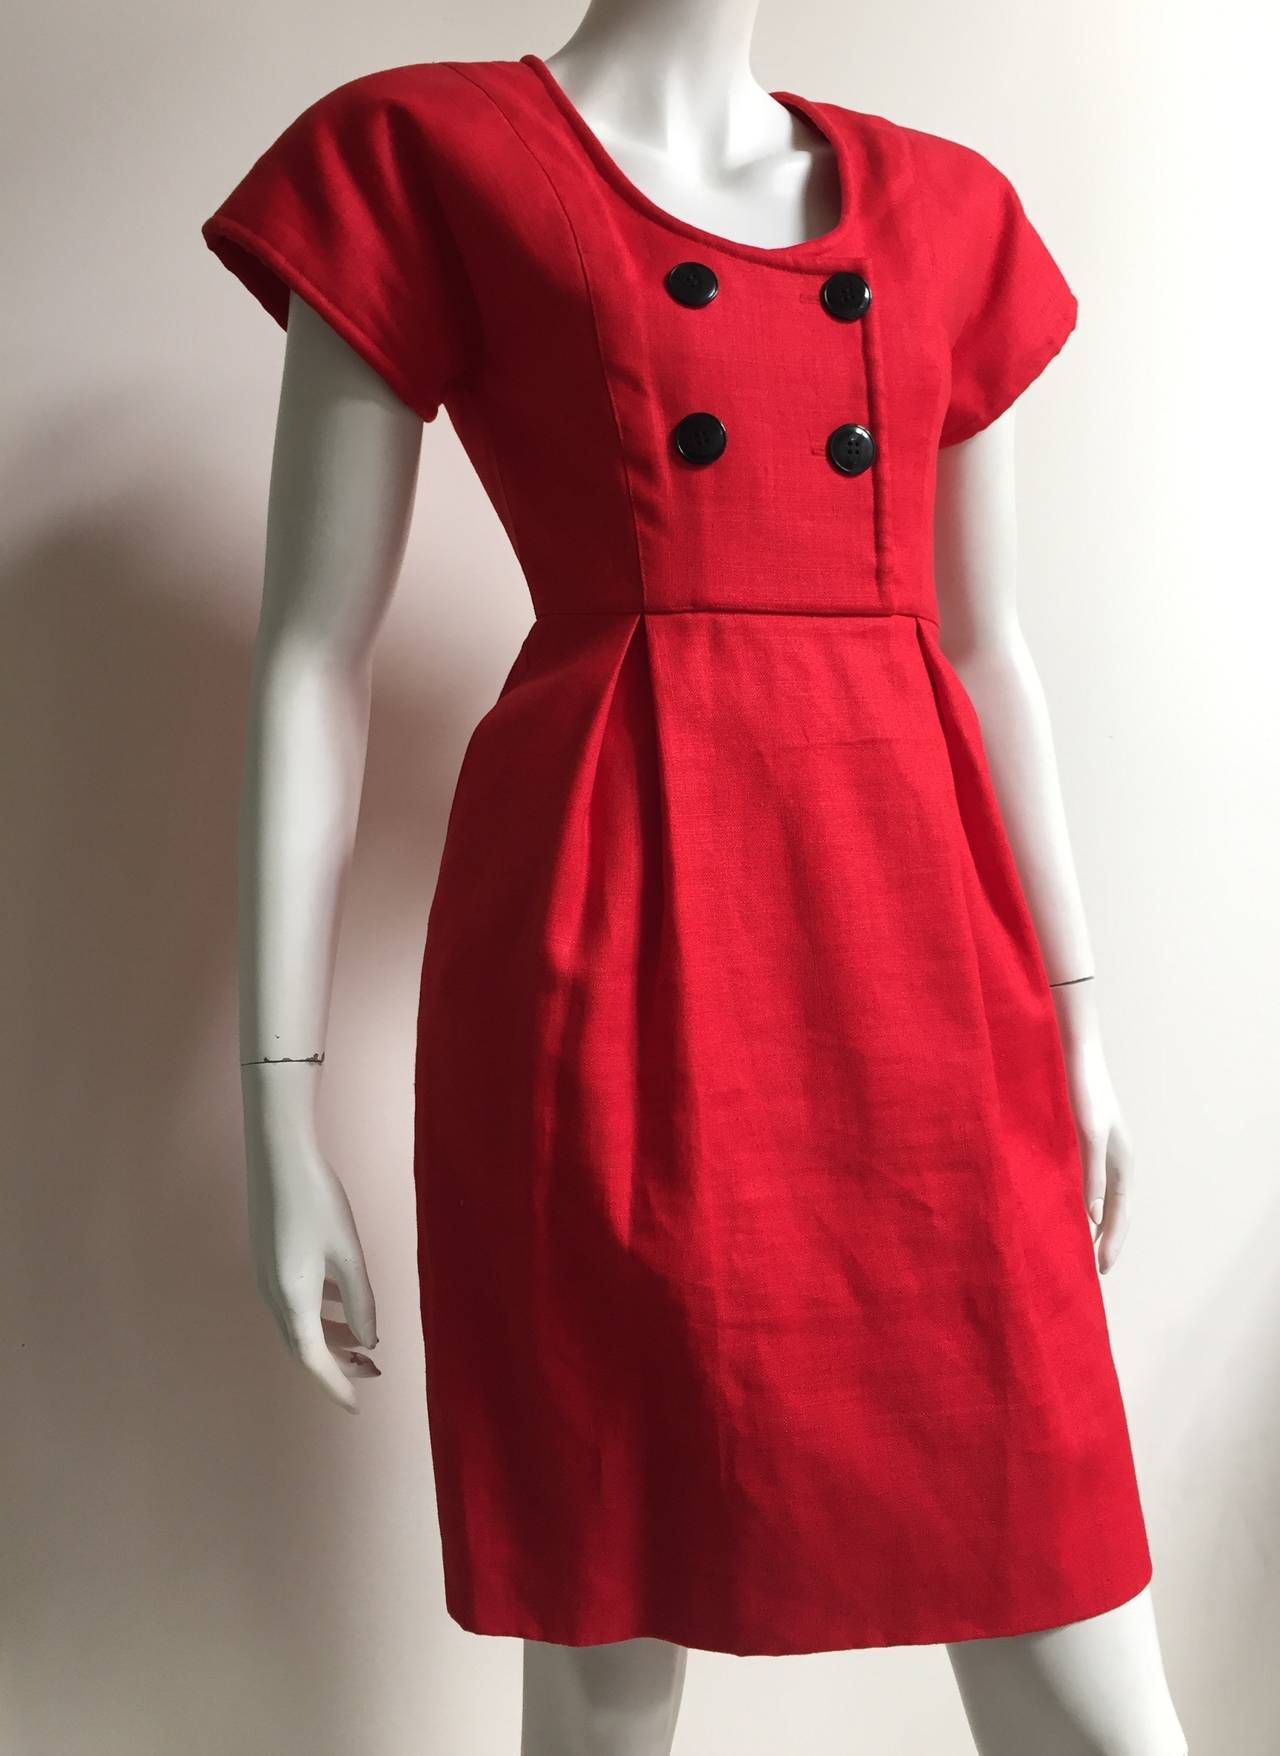 Geoffrey Beene 1970s Red Linen Dress With Pockets Size 4. In Excellent Condition For Sale In Atlanta, GA